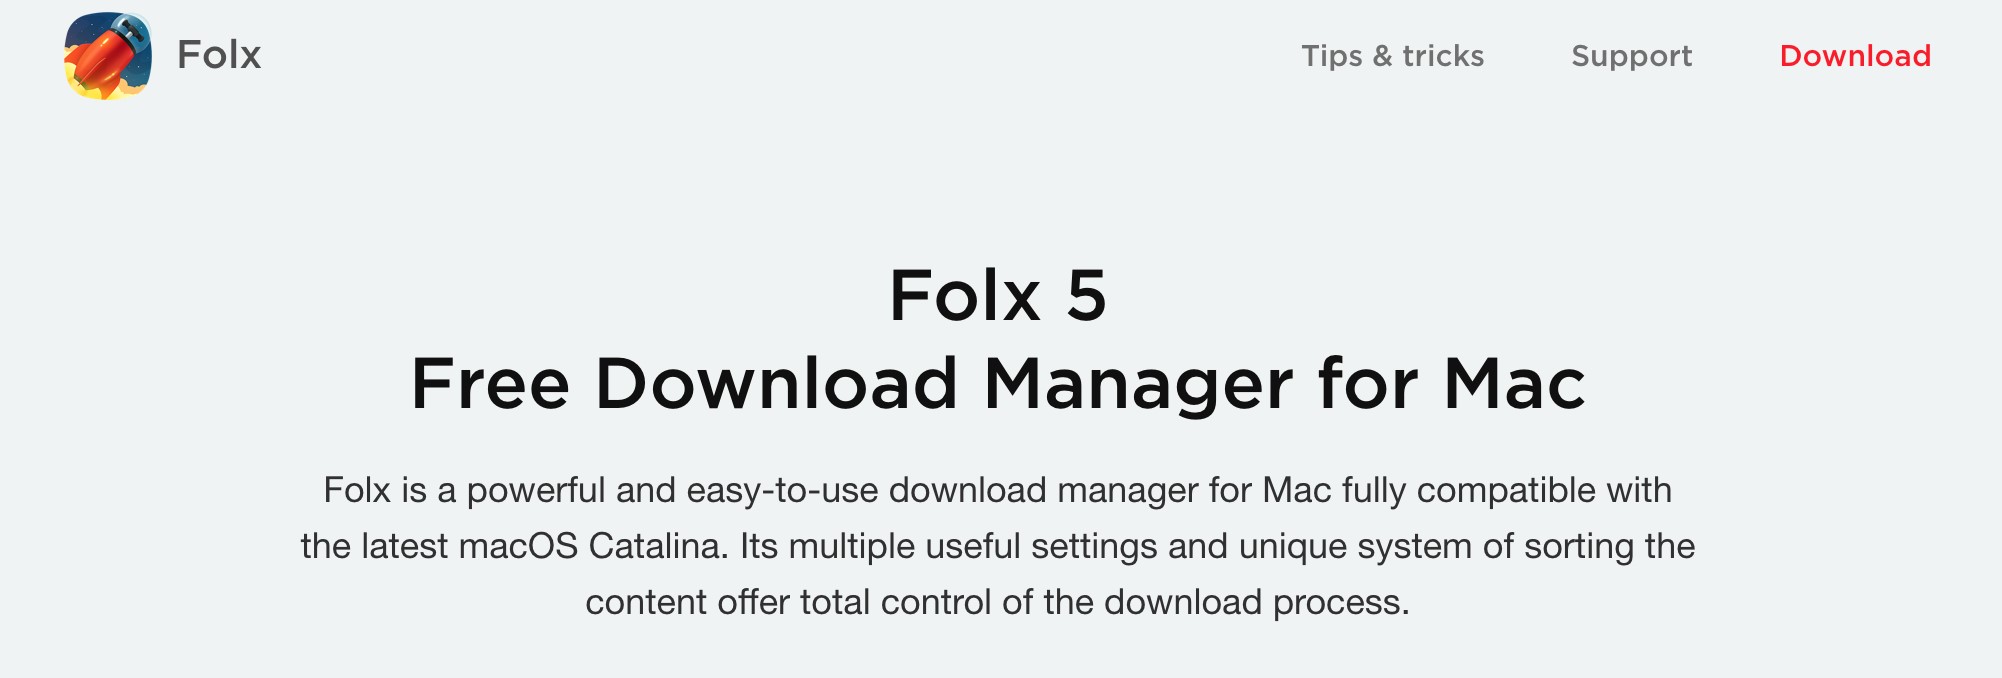 Download folx for mac 10.7.5